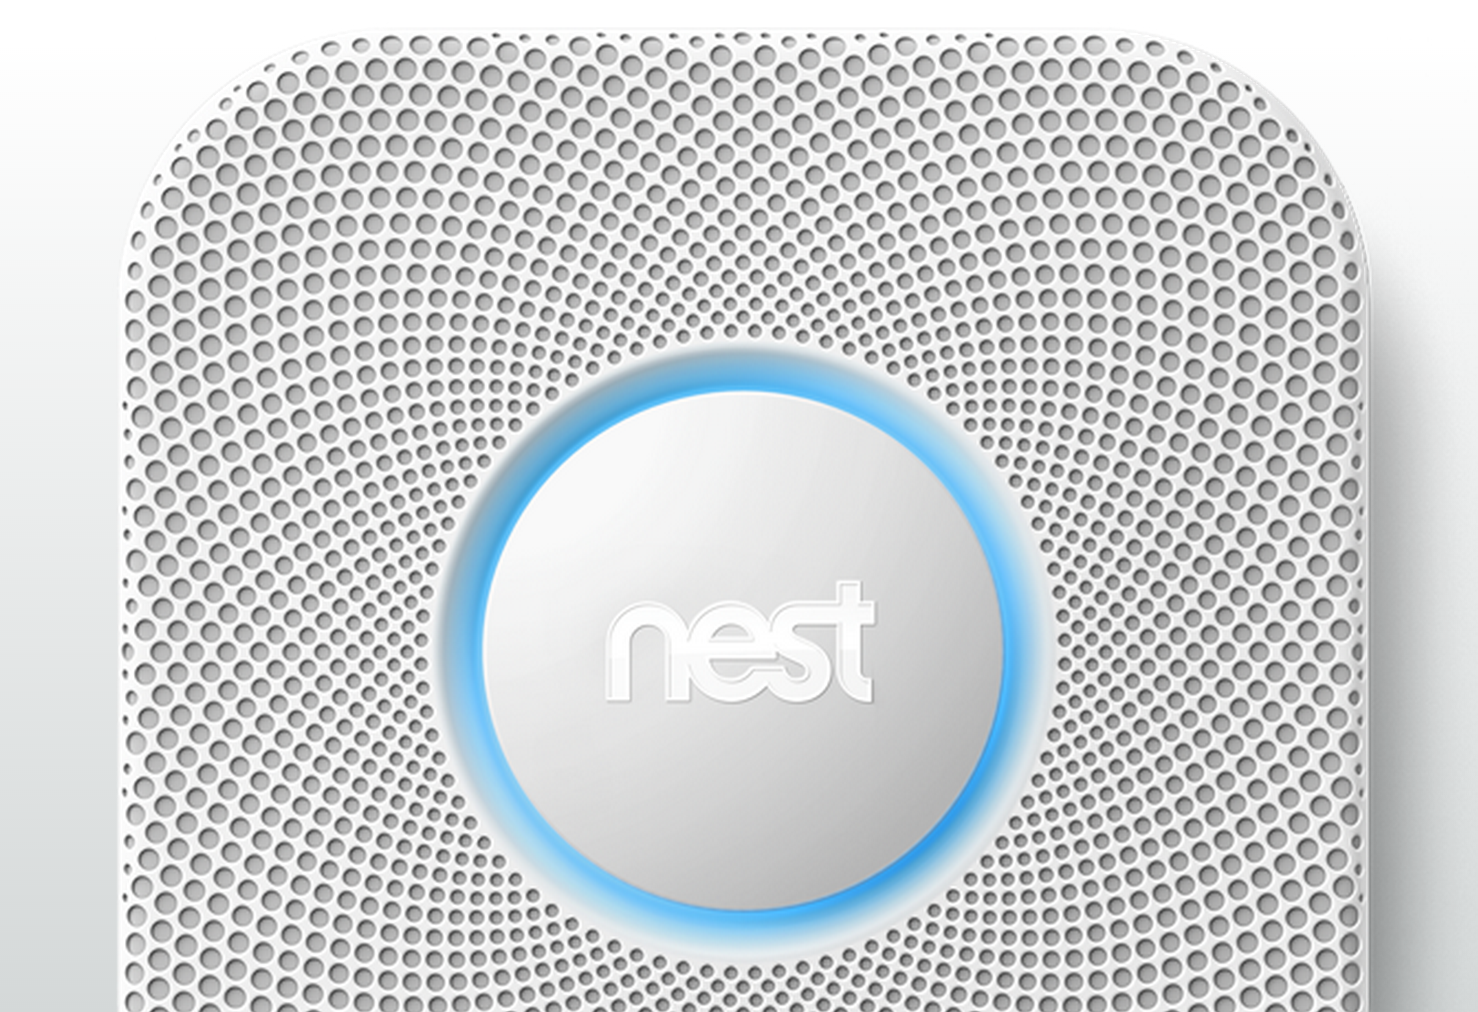 Nest Protect Will Be a Beautiful Smoke & CO2 Detector